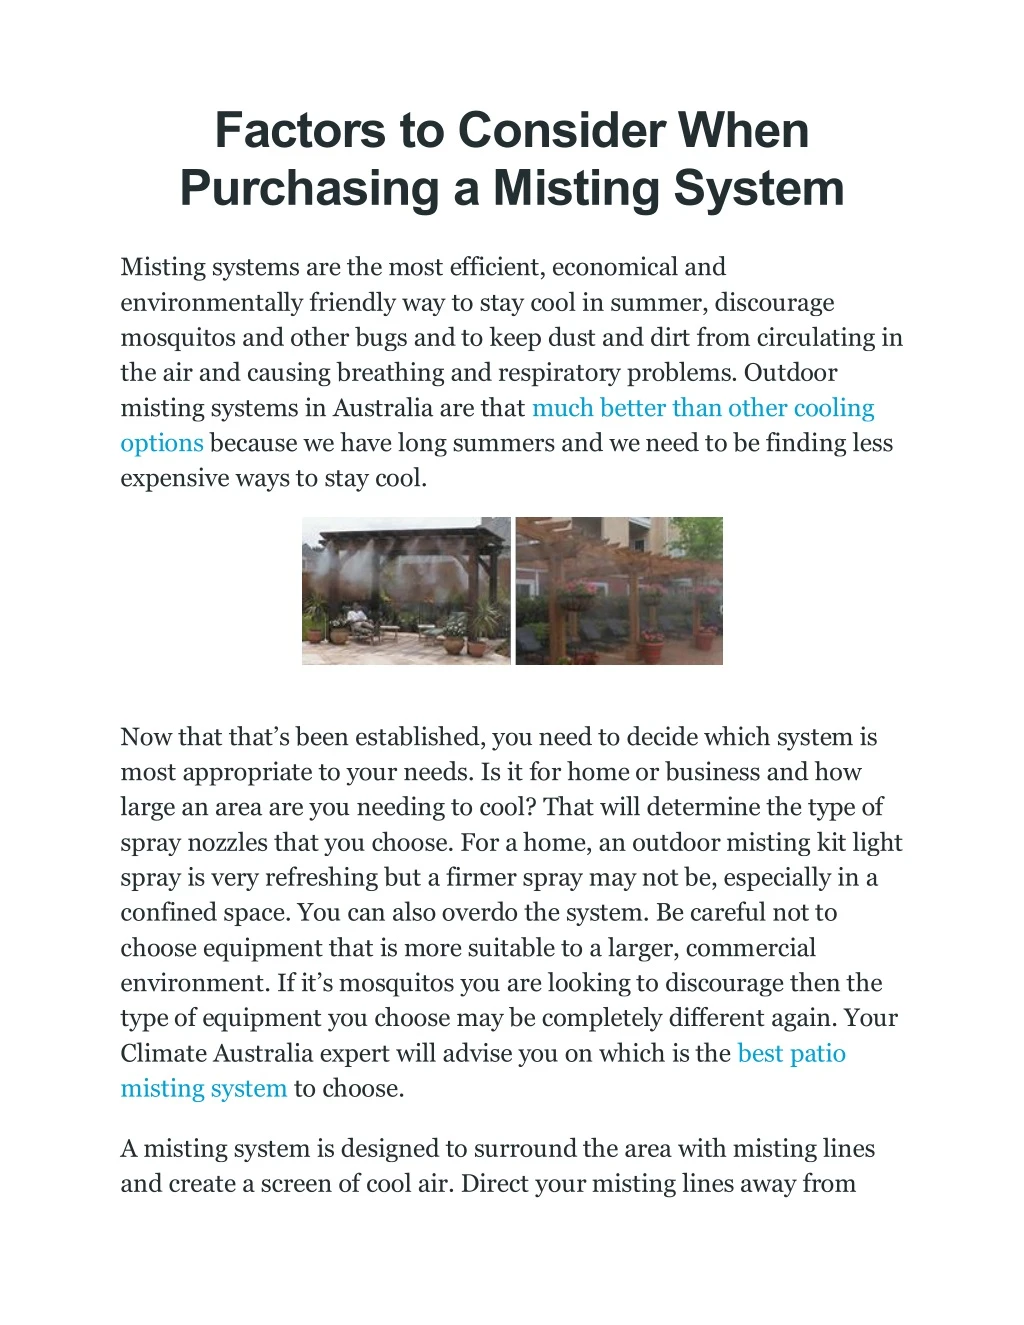 factors to consider when purchasing a misting